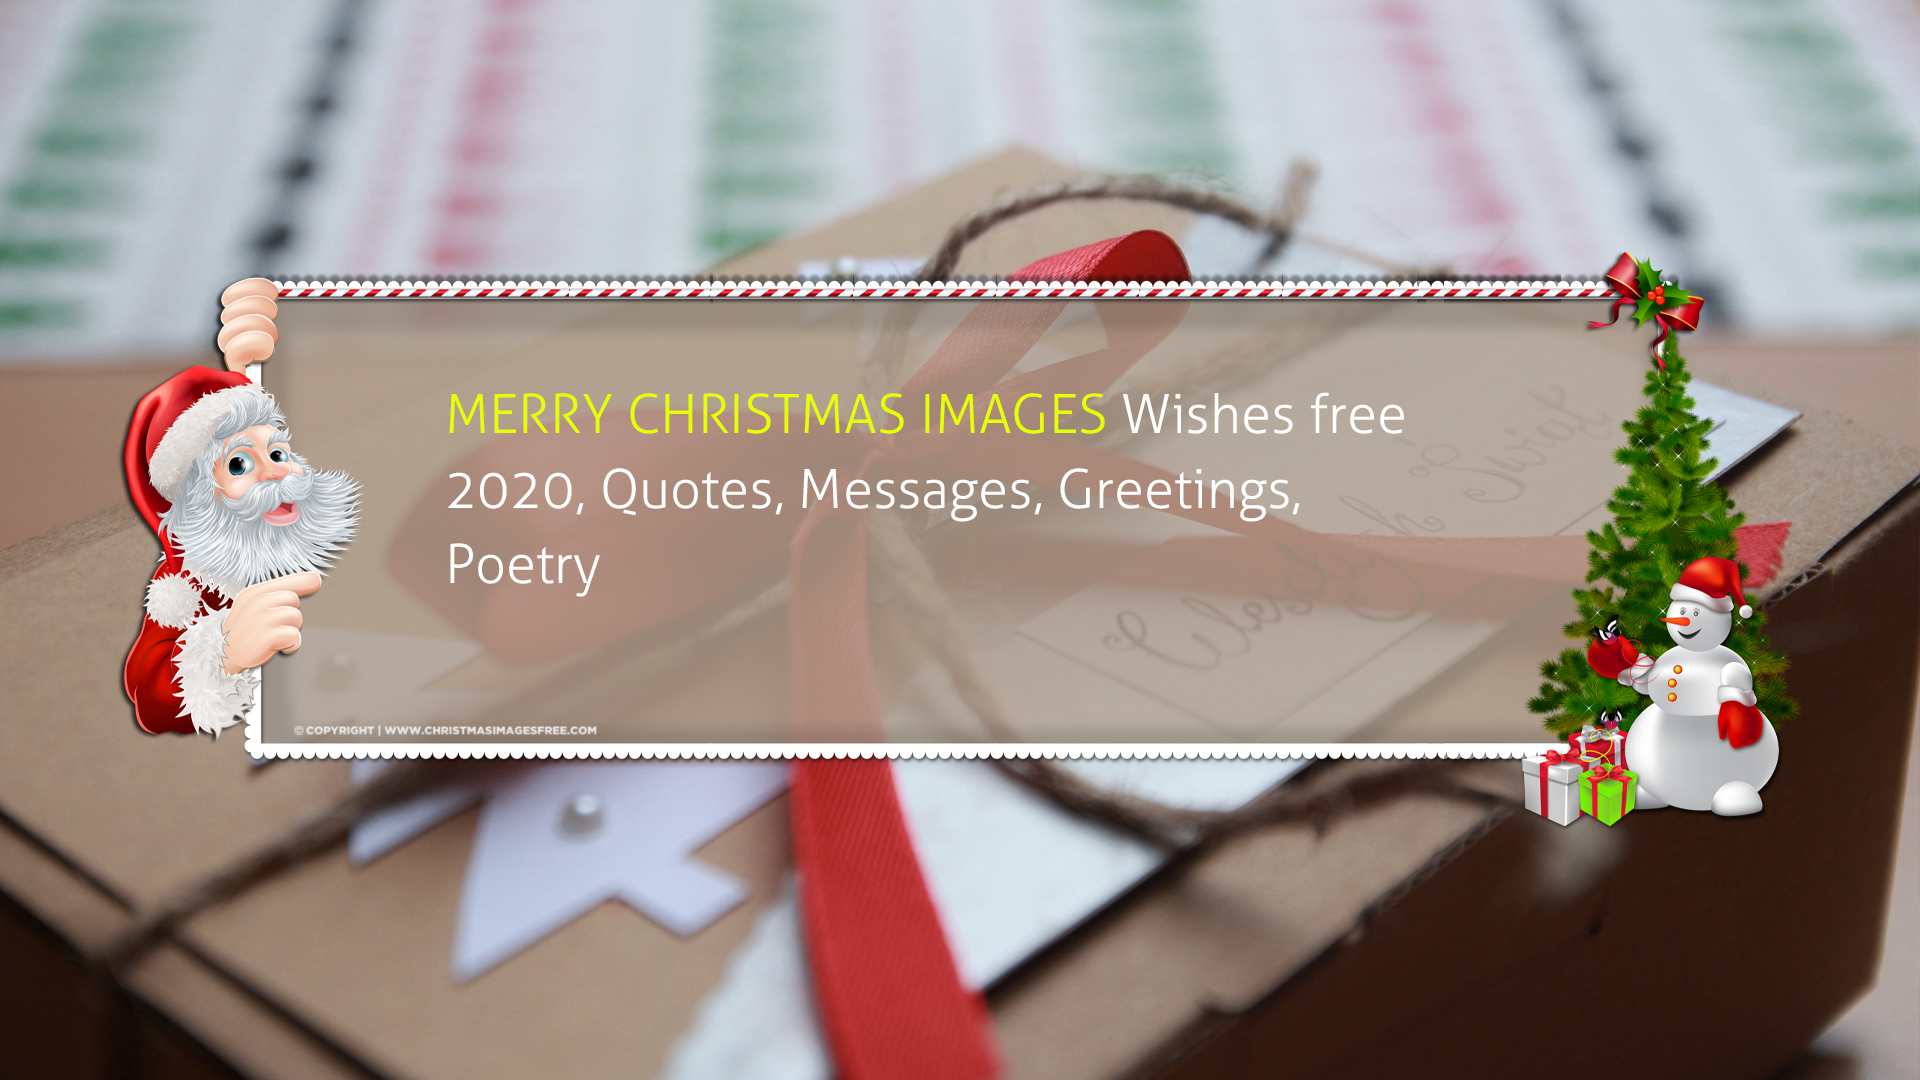 Merry Christmas Images Wishes free 2021, Quotes, Messages, Greetings